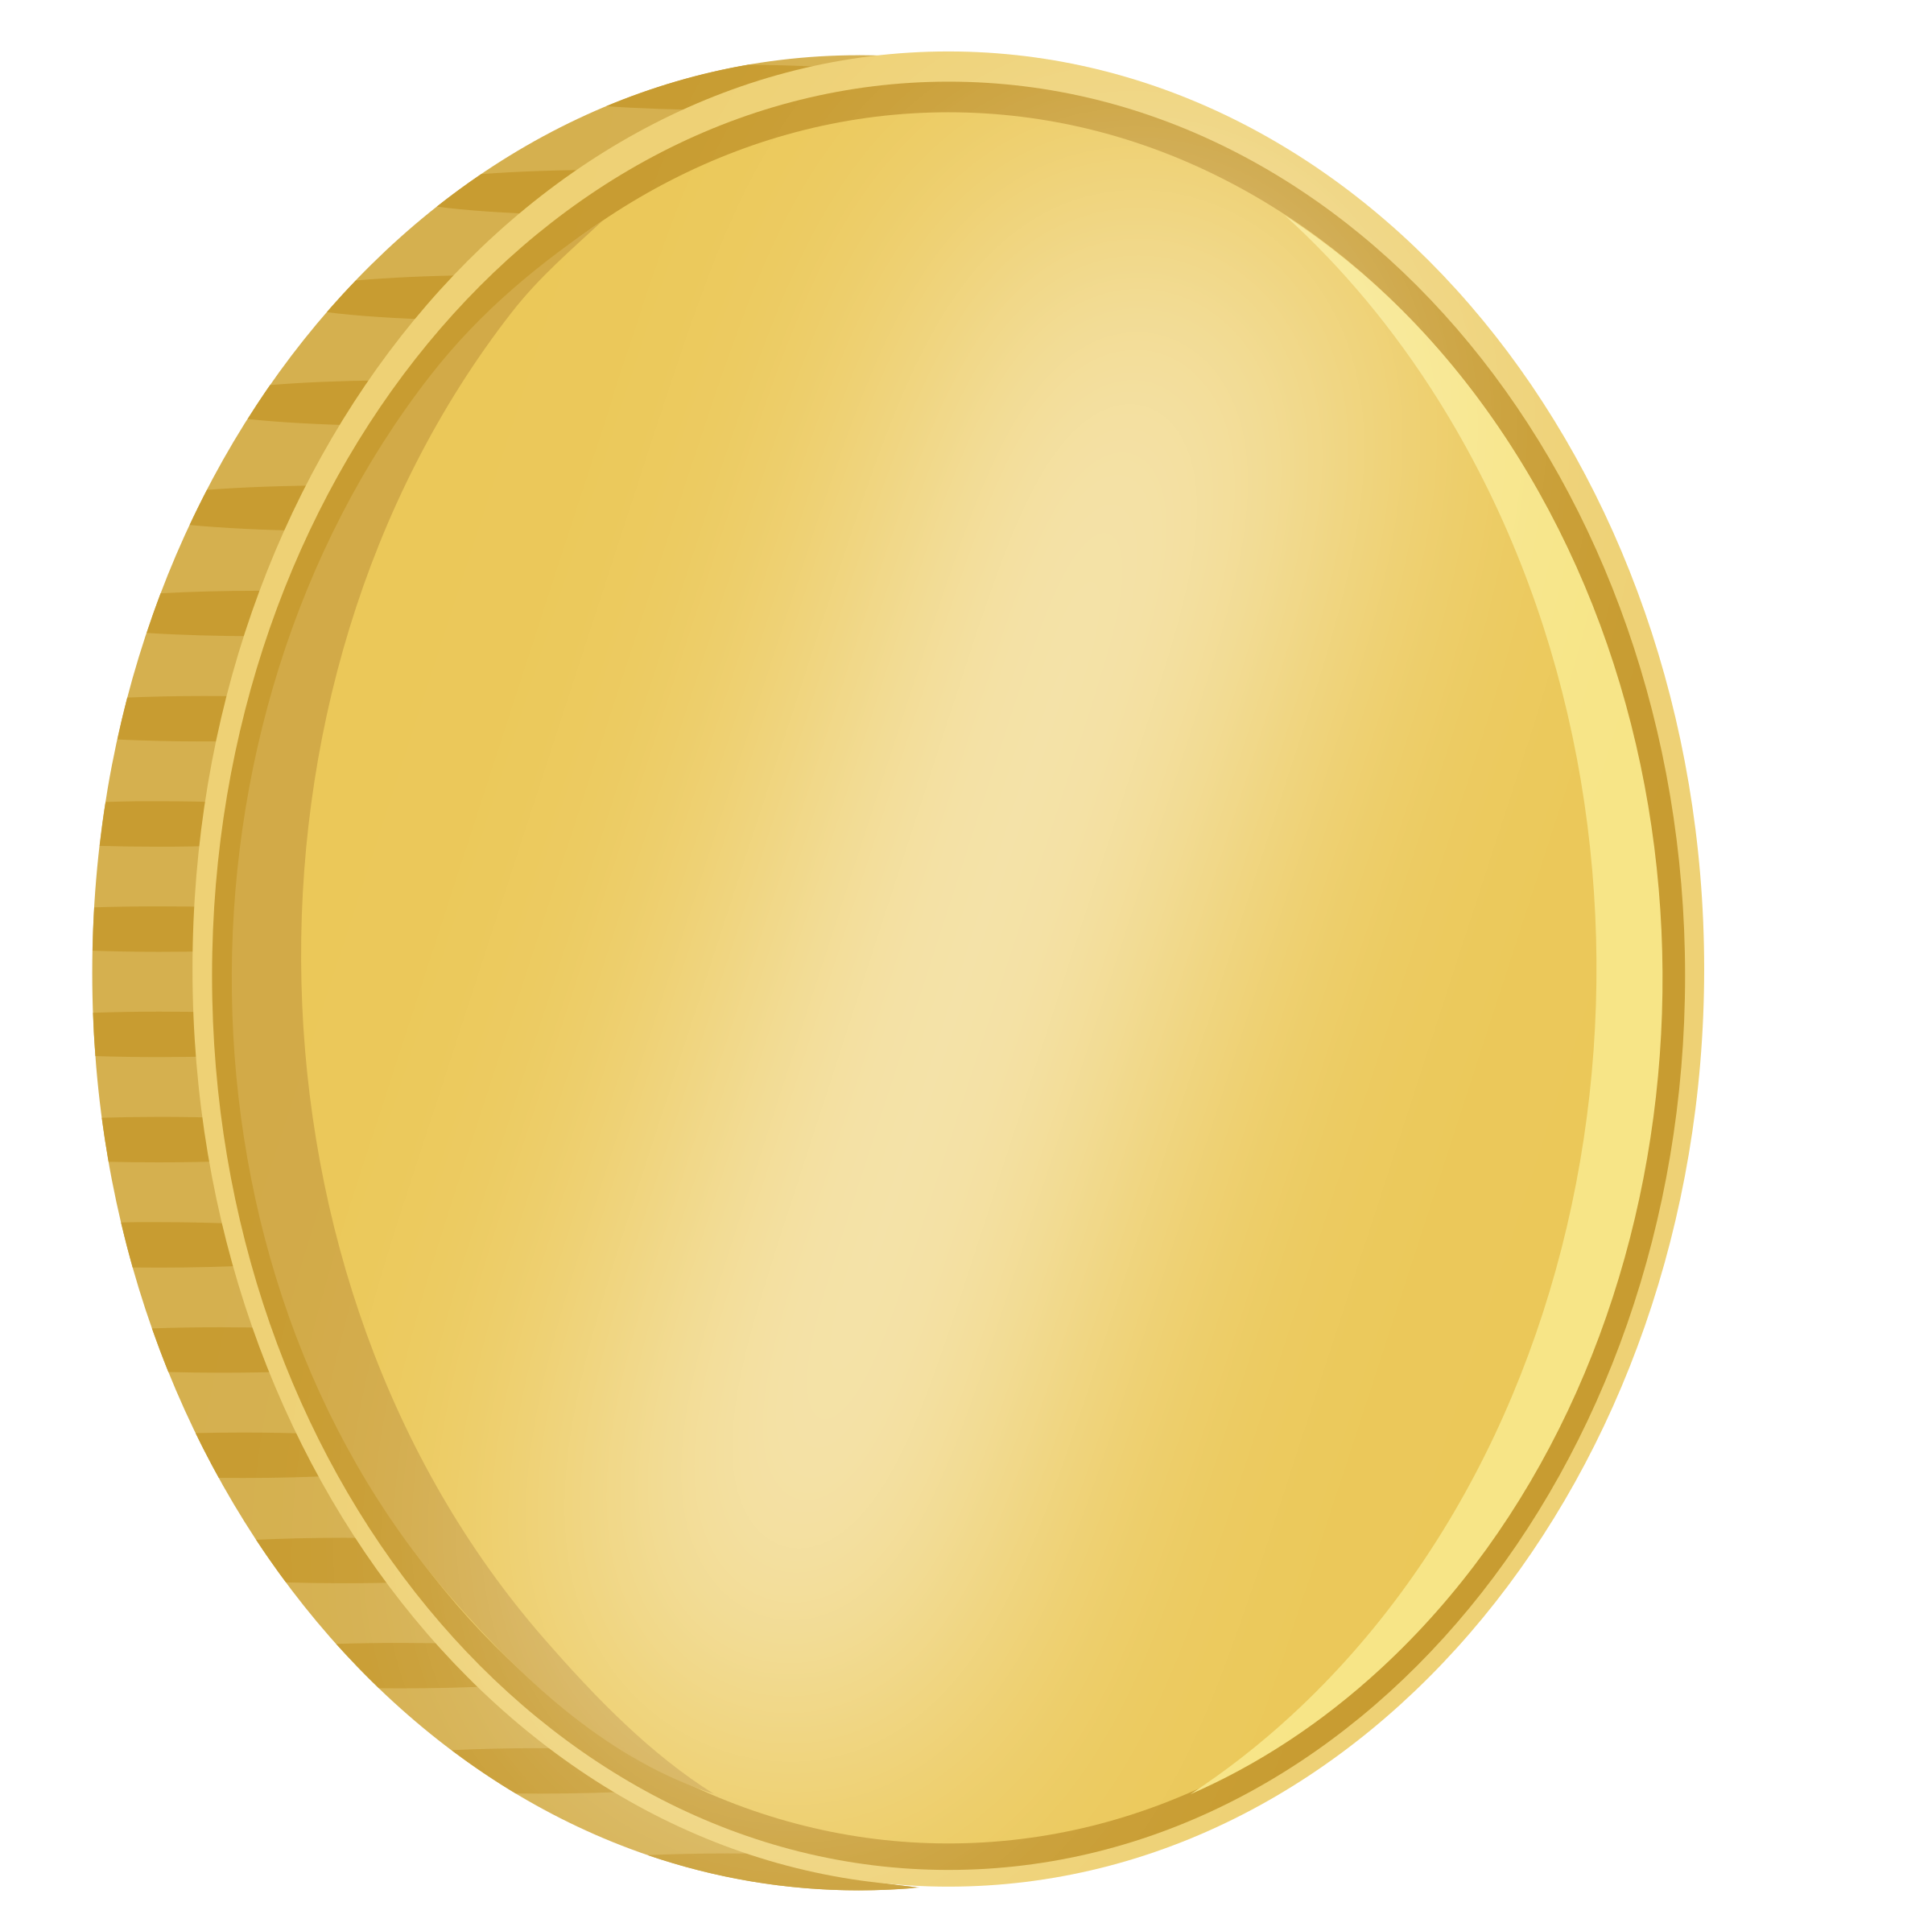 Coin Stack PNG Free Download